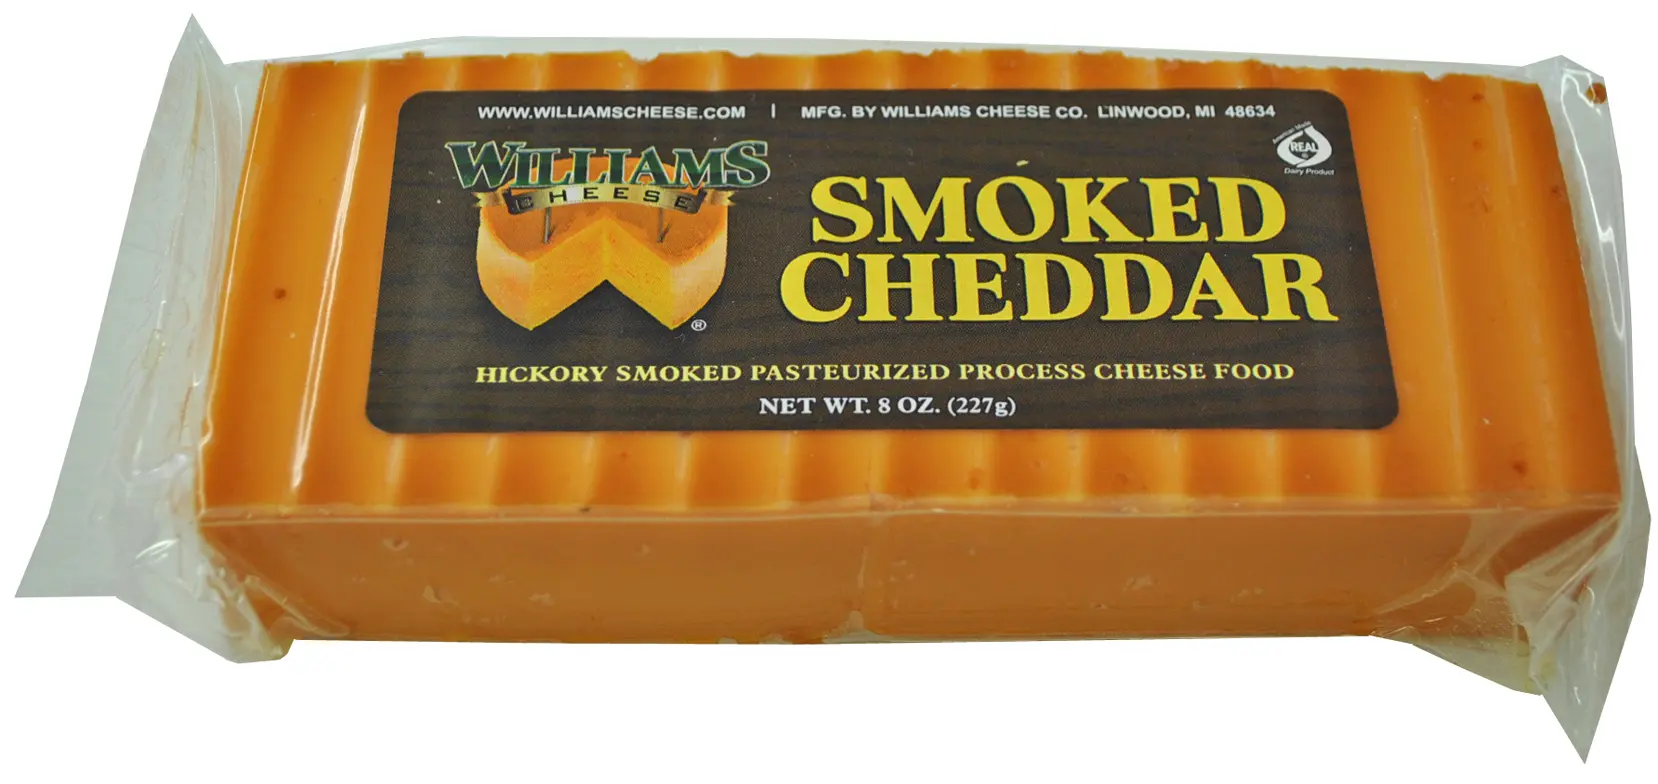 smoked cheddar cheese - How do you eat smoked cheese